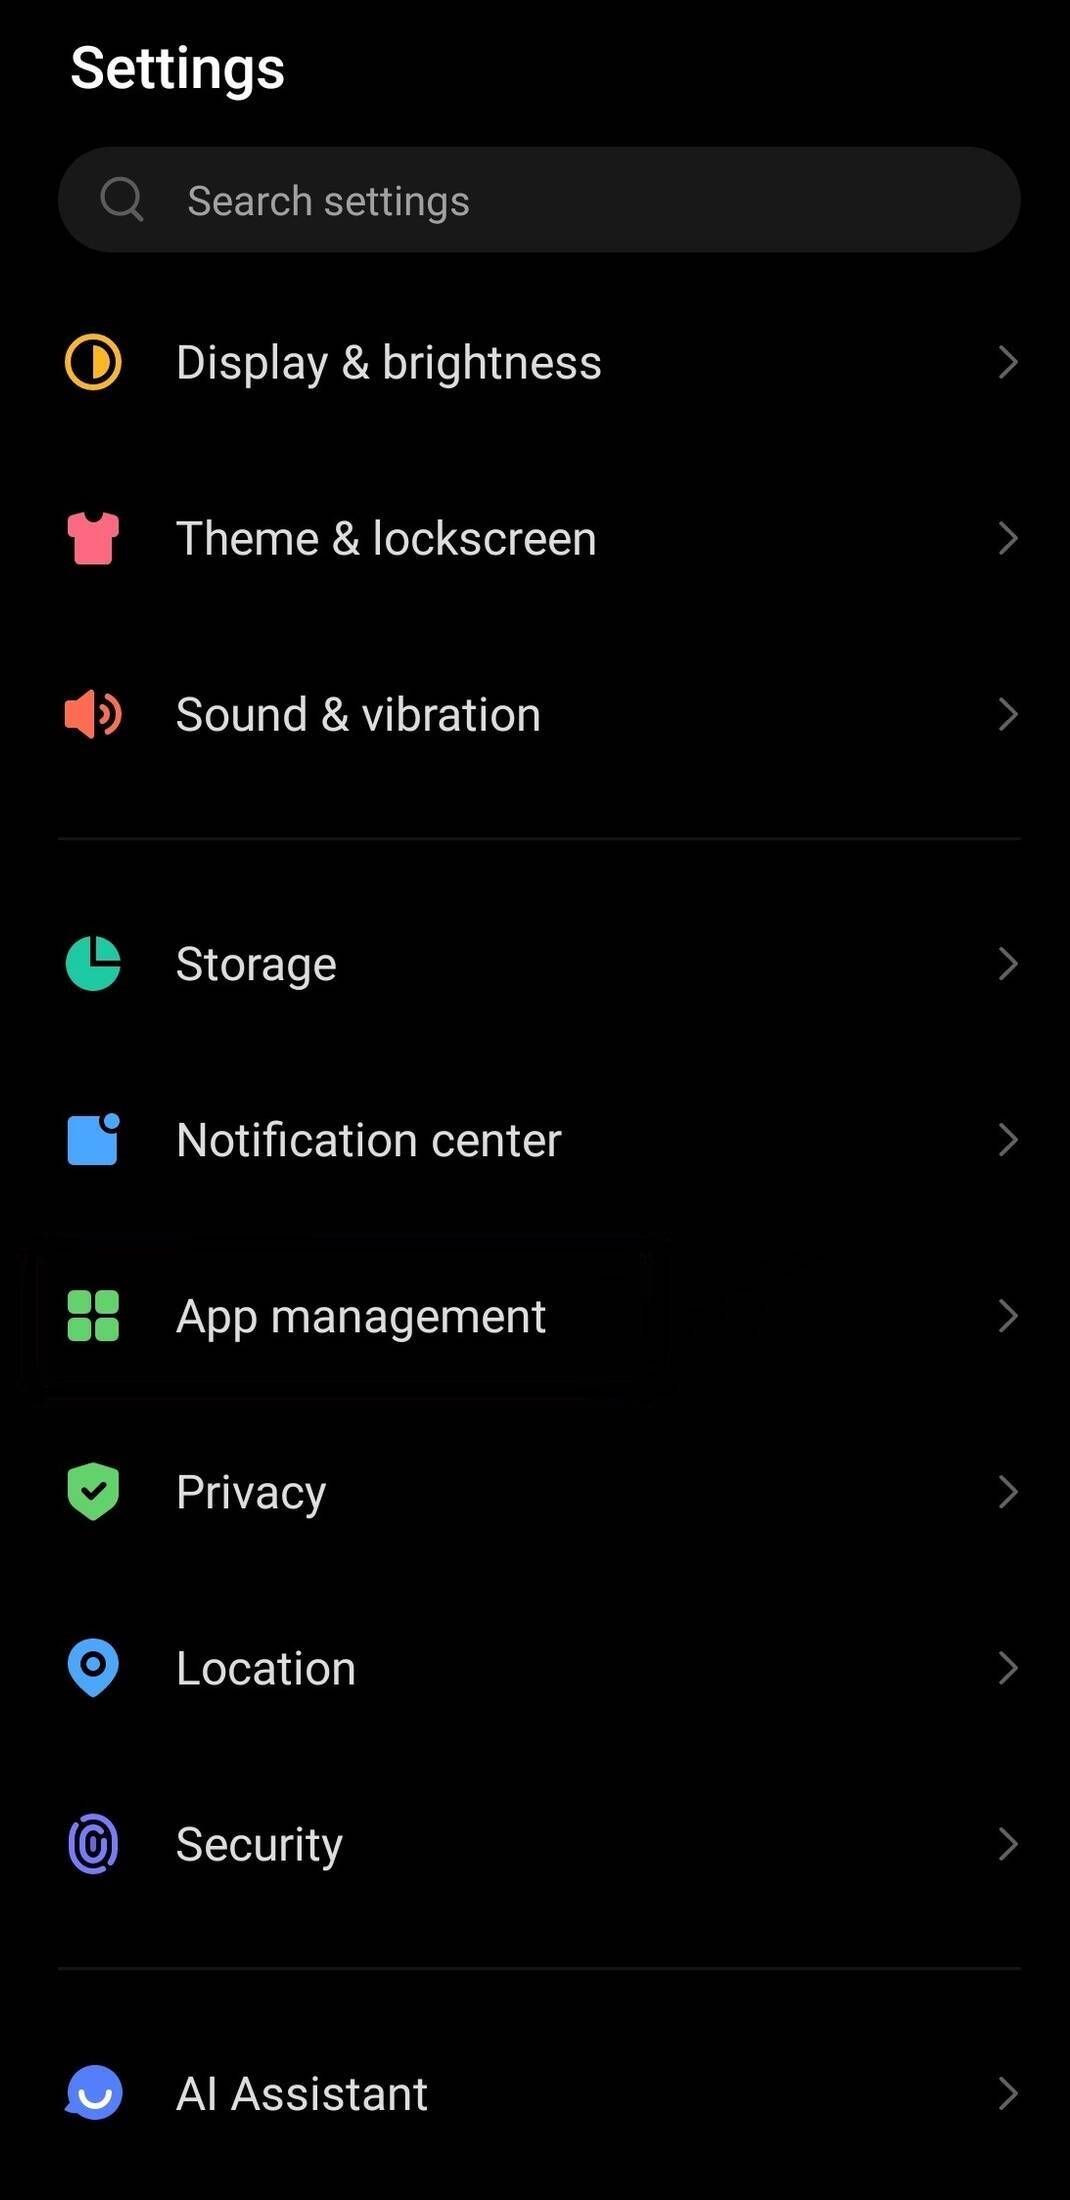 Settings menu showing app management and other options